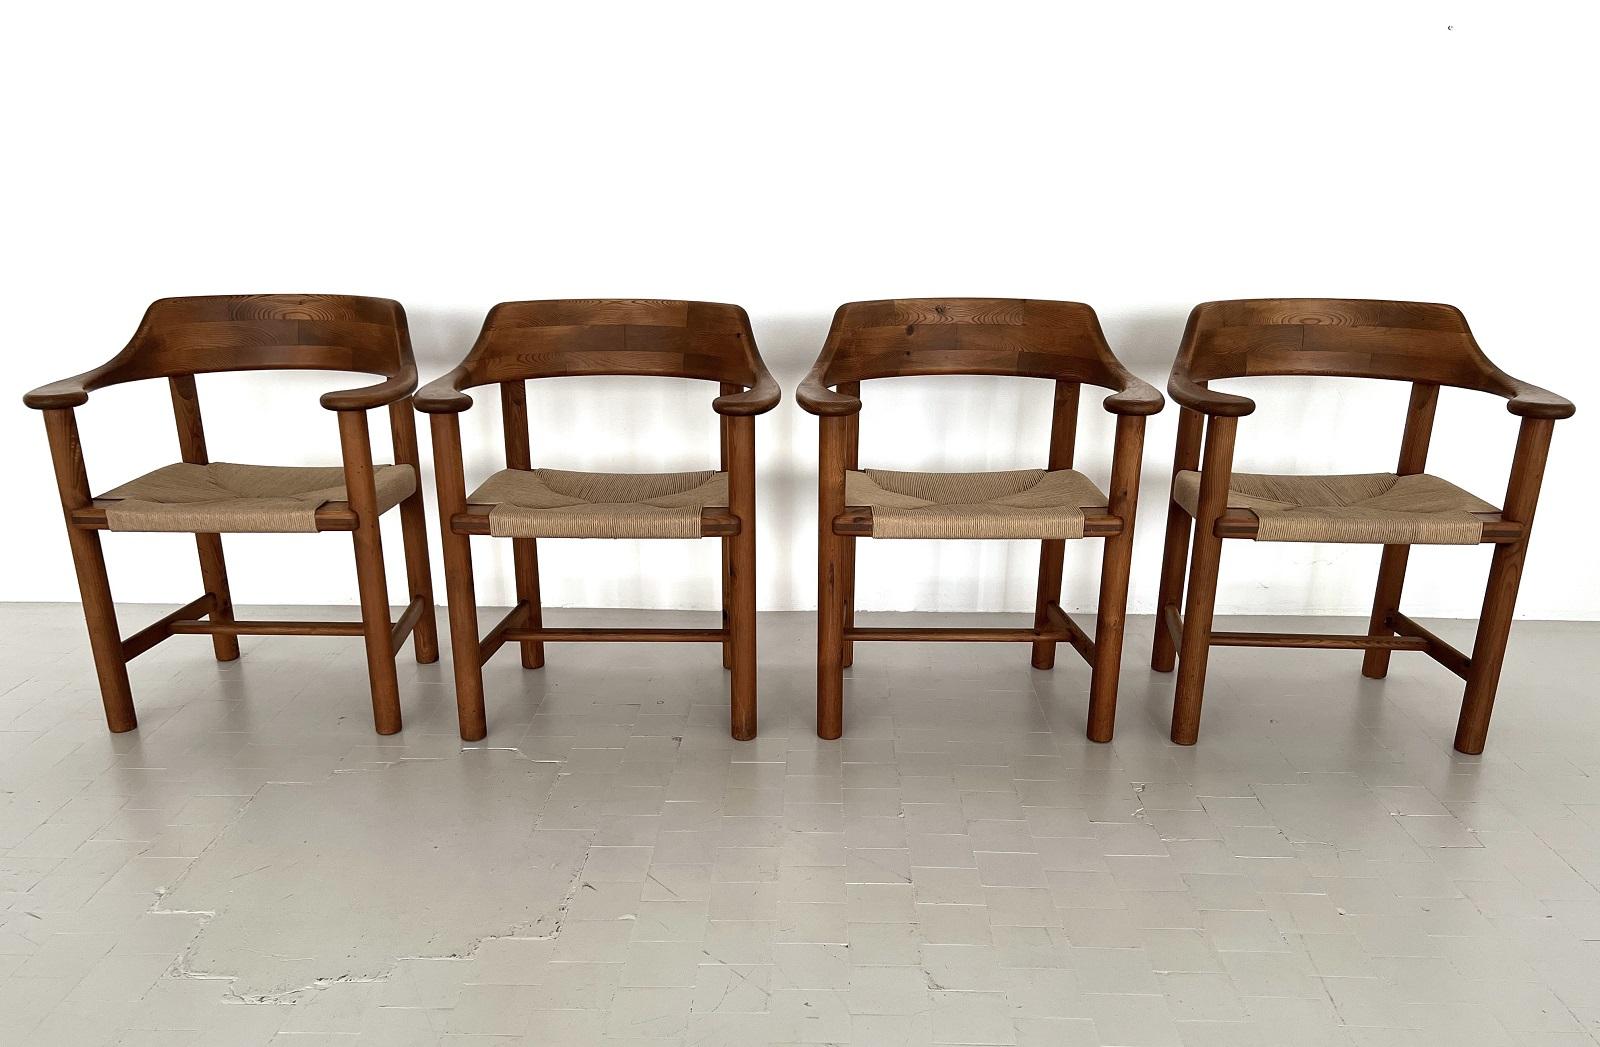 Rainer Daumiller Dining Chairs in Pine and New Paper Cord, 1970s For Sale 3